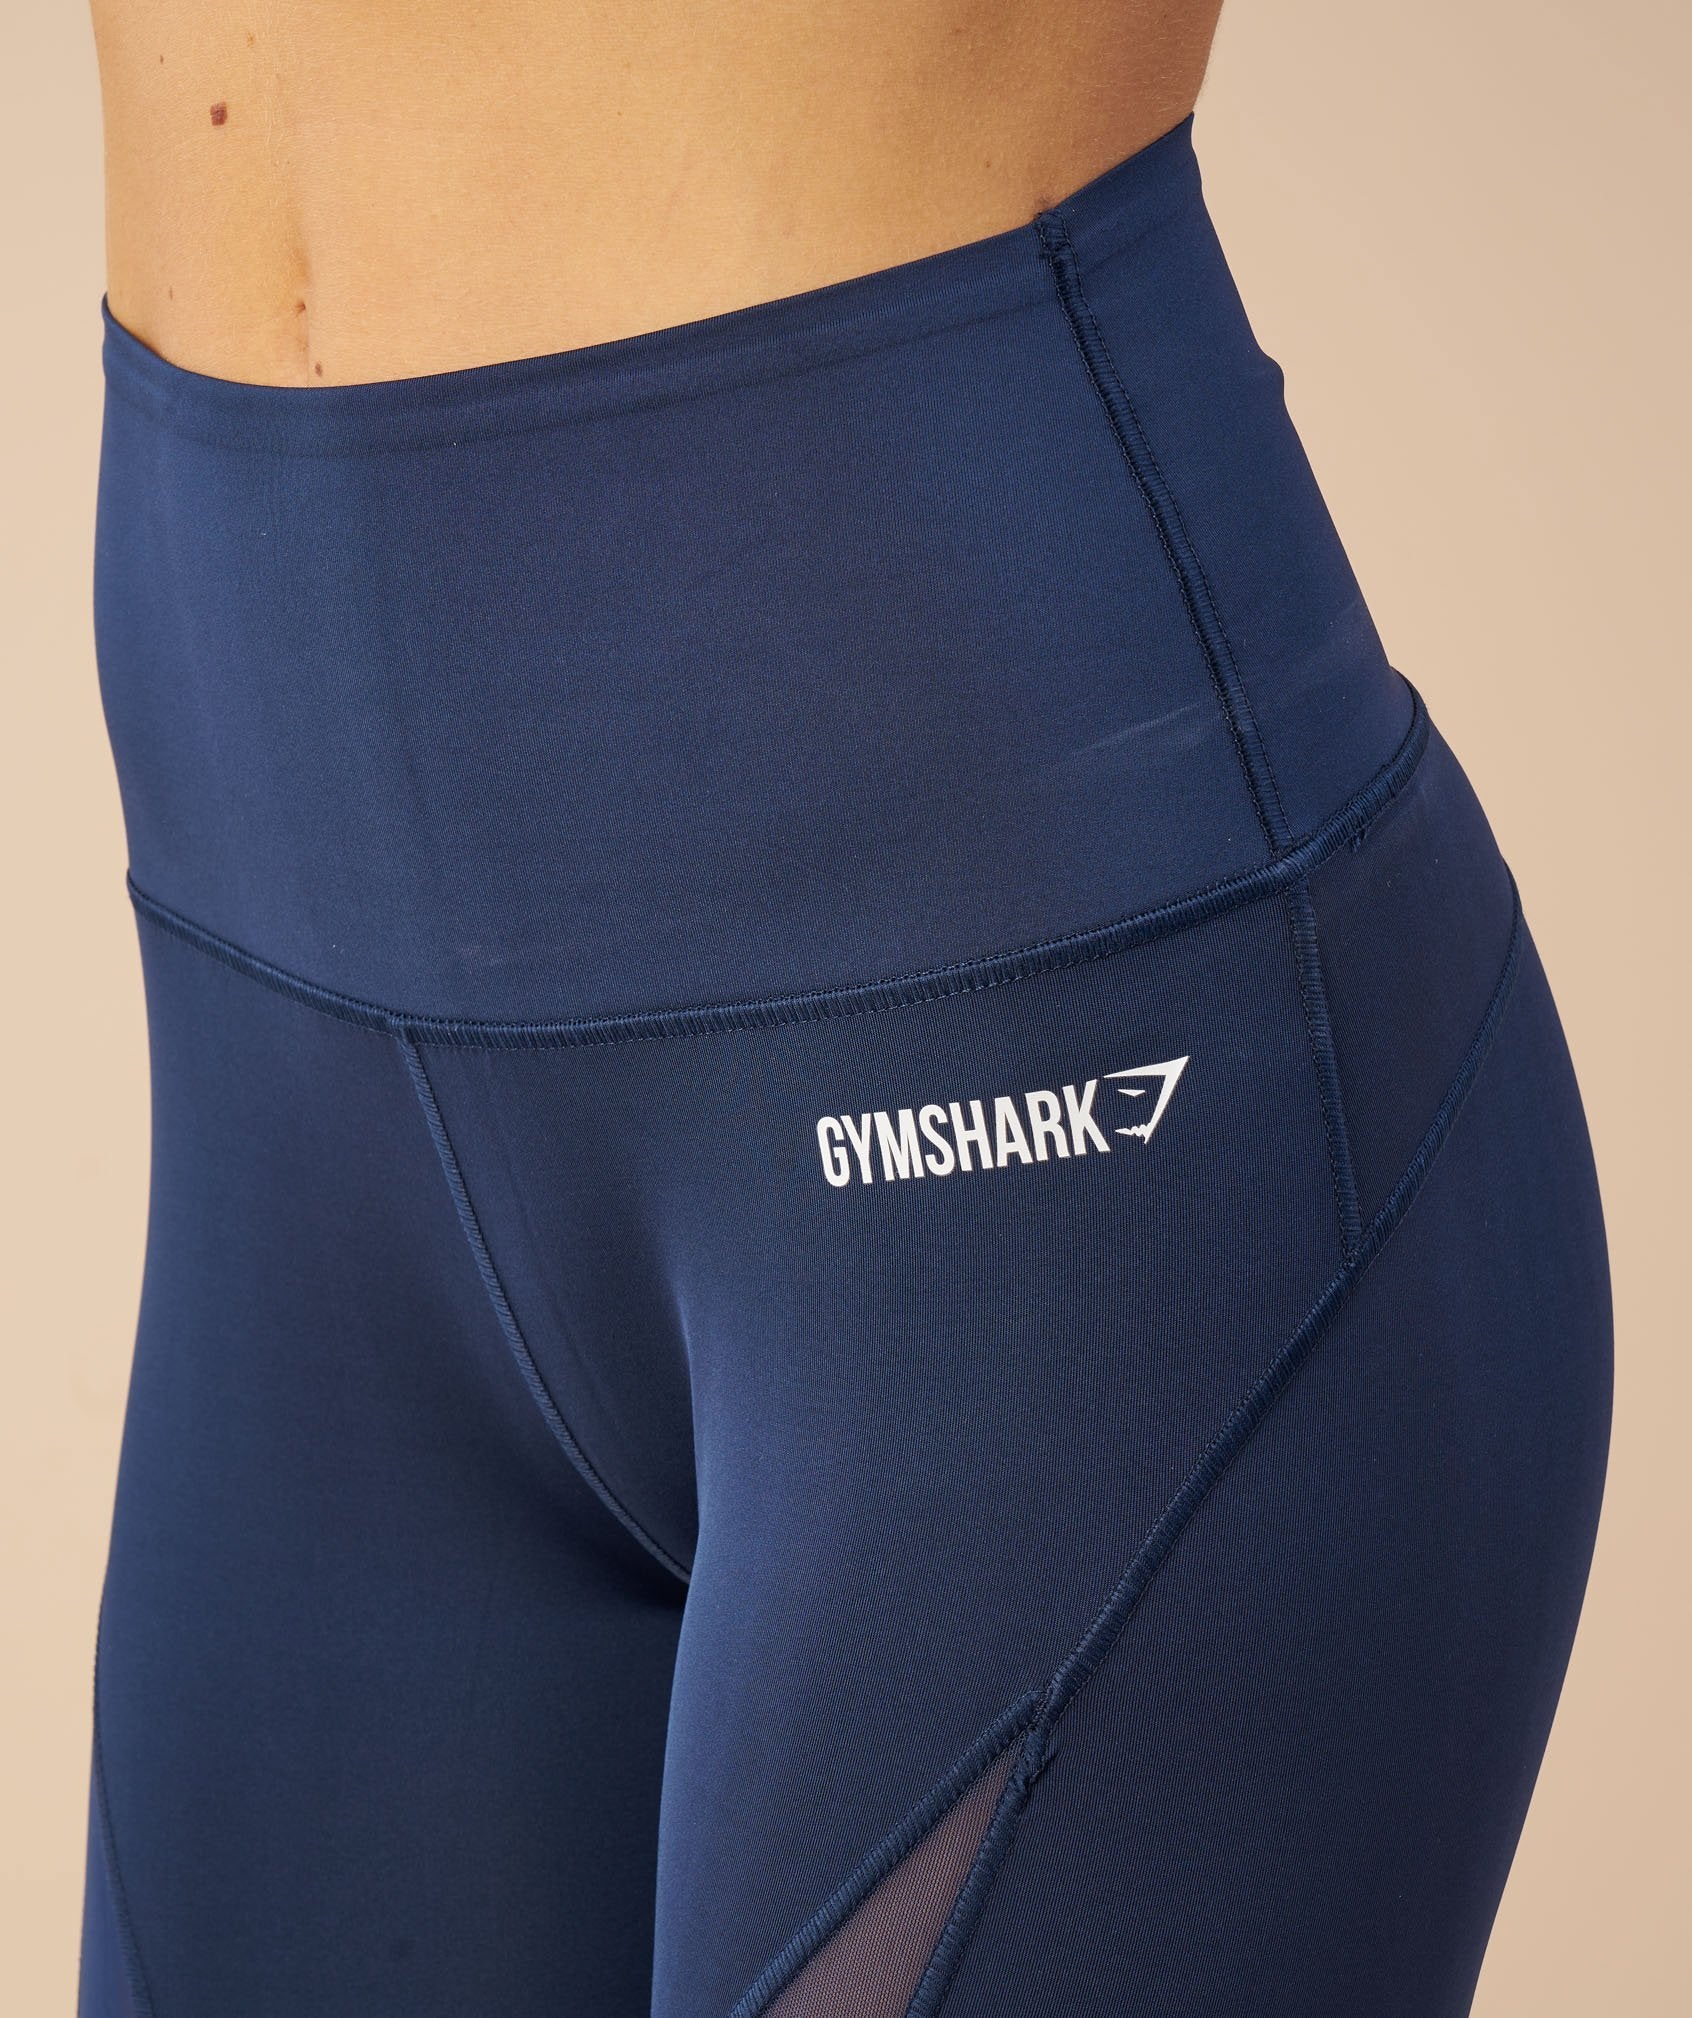 Fusion Cropped Leggings in Sapphire Blue - view 6